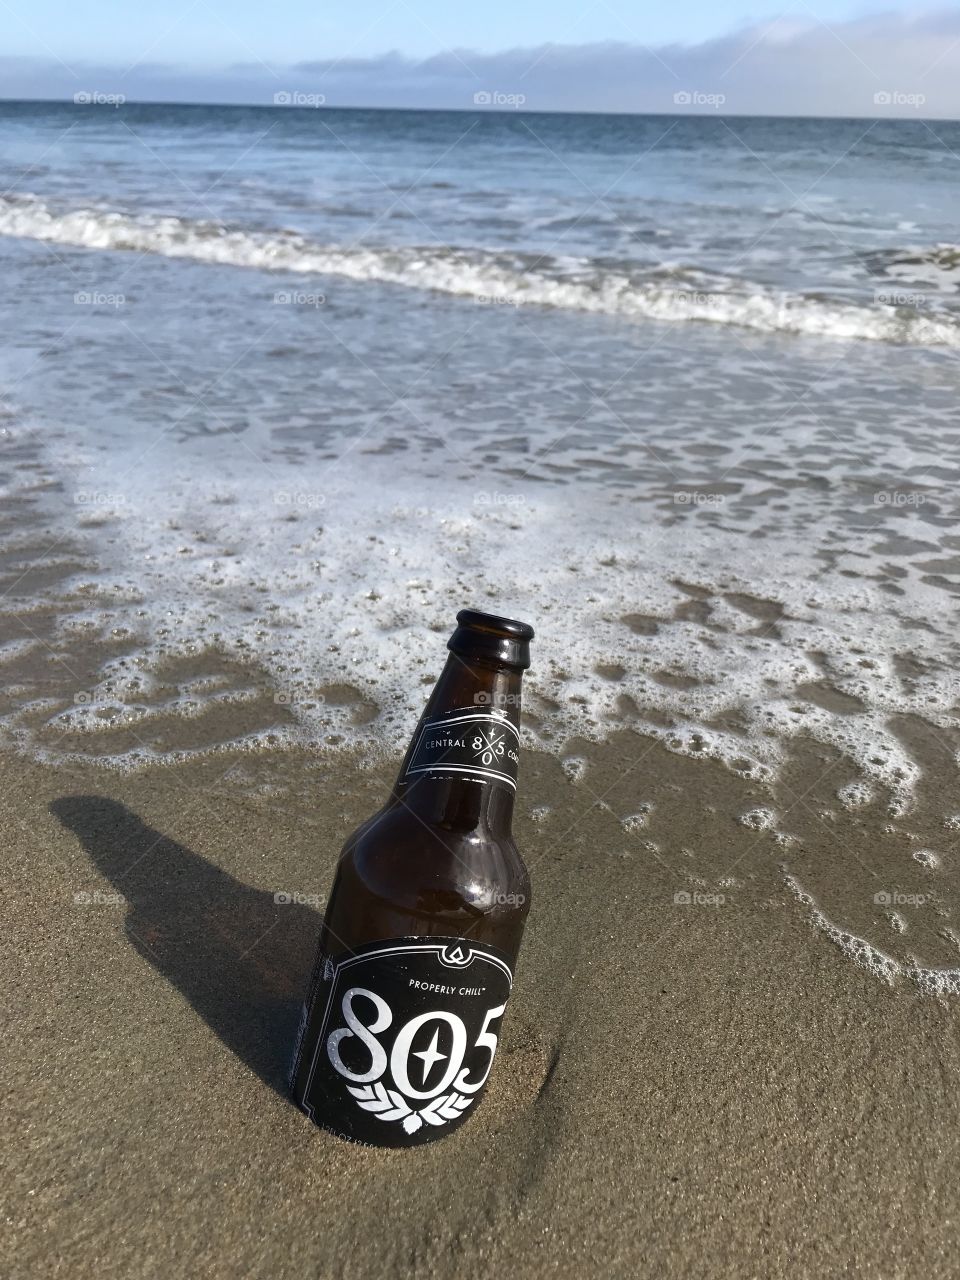 No beach trip is done without a beer 805 delicious 